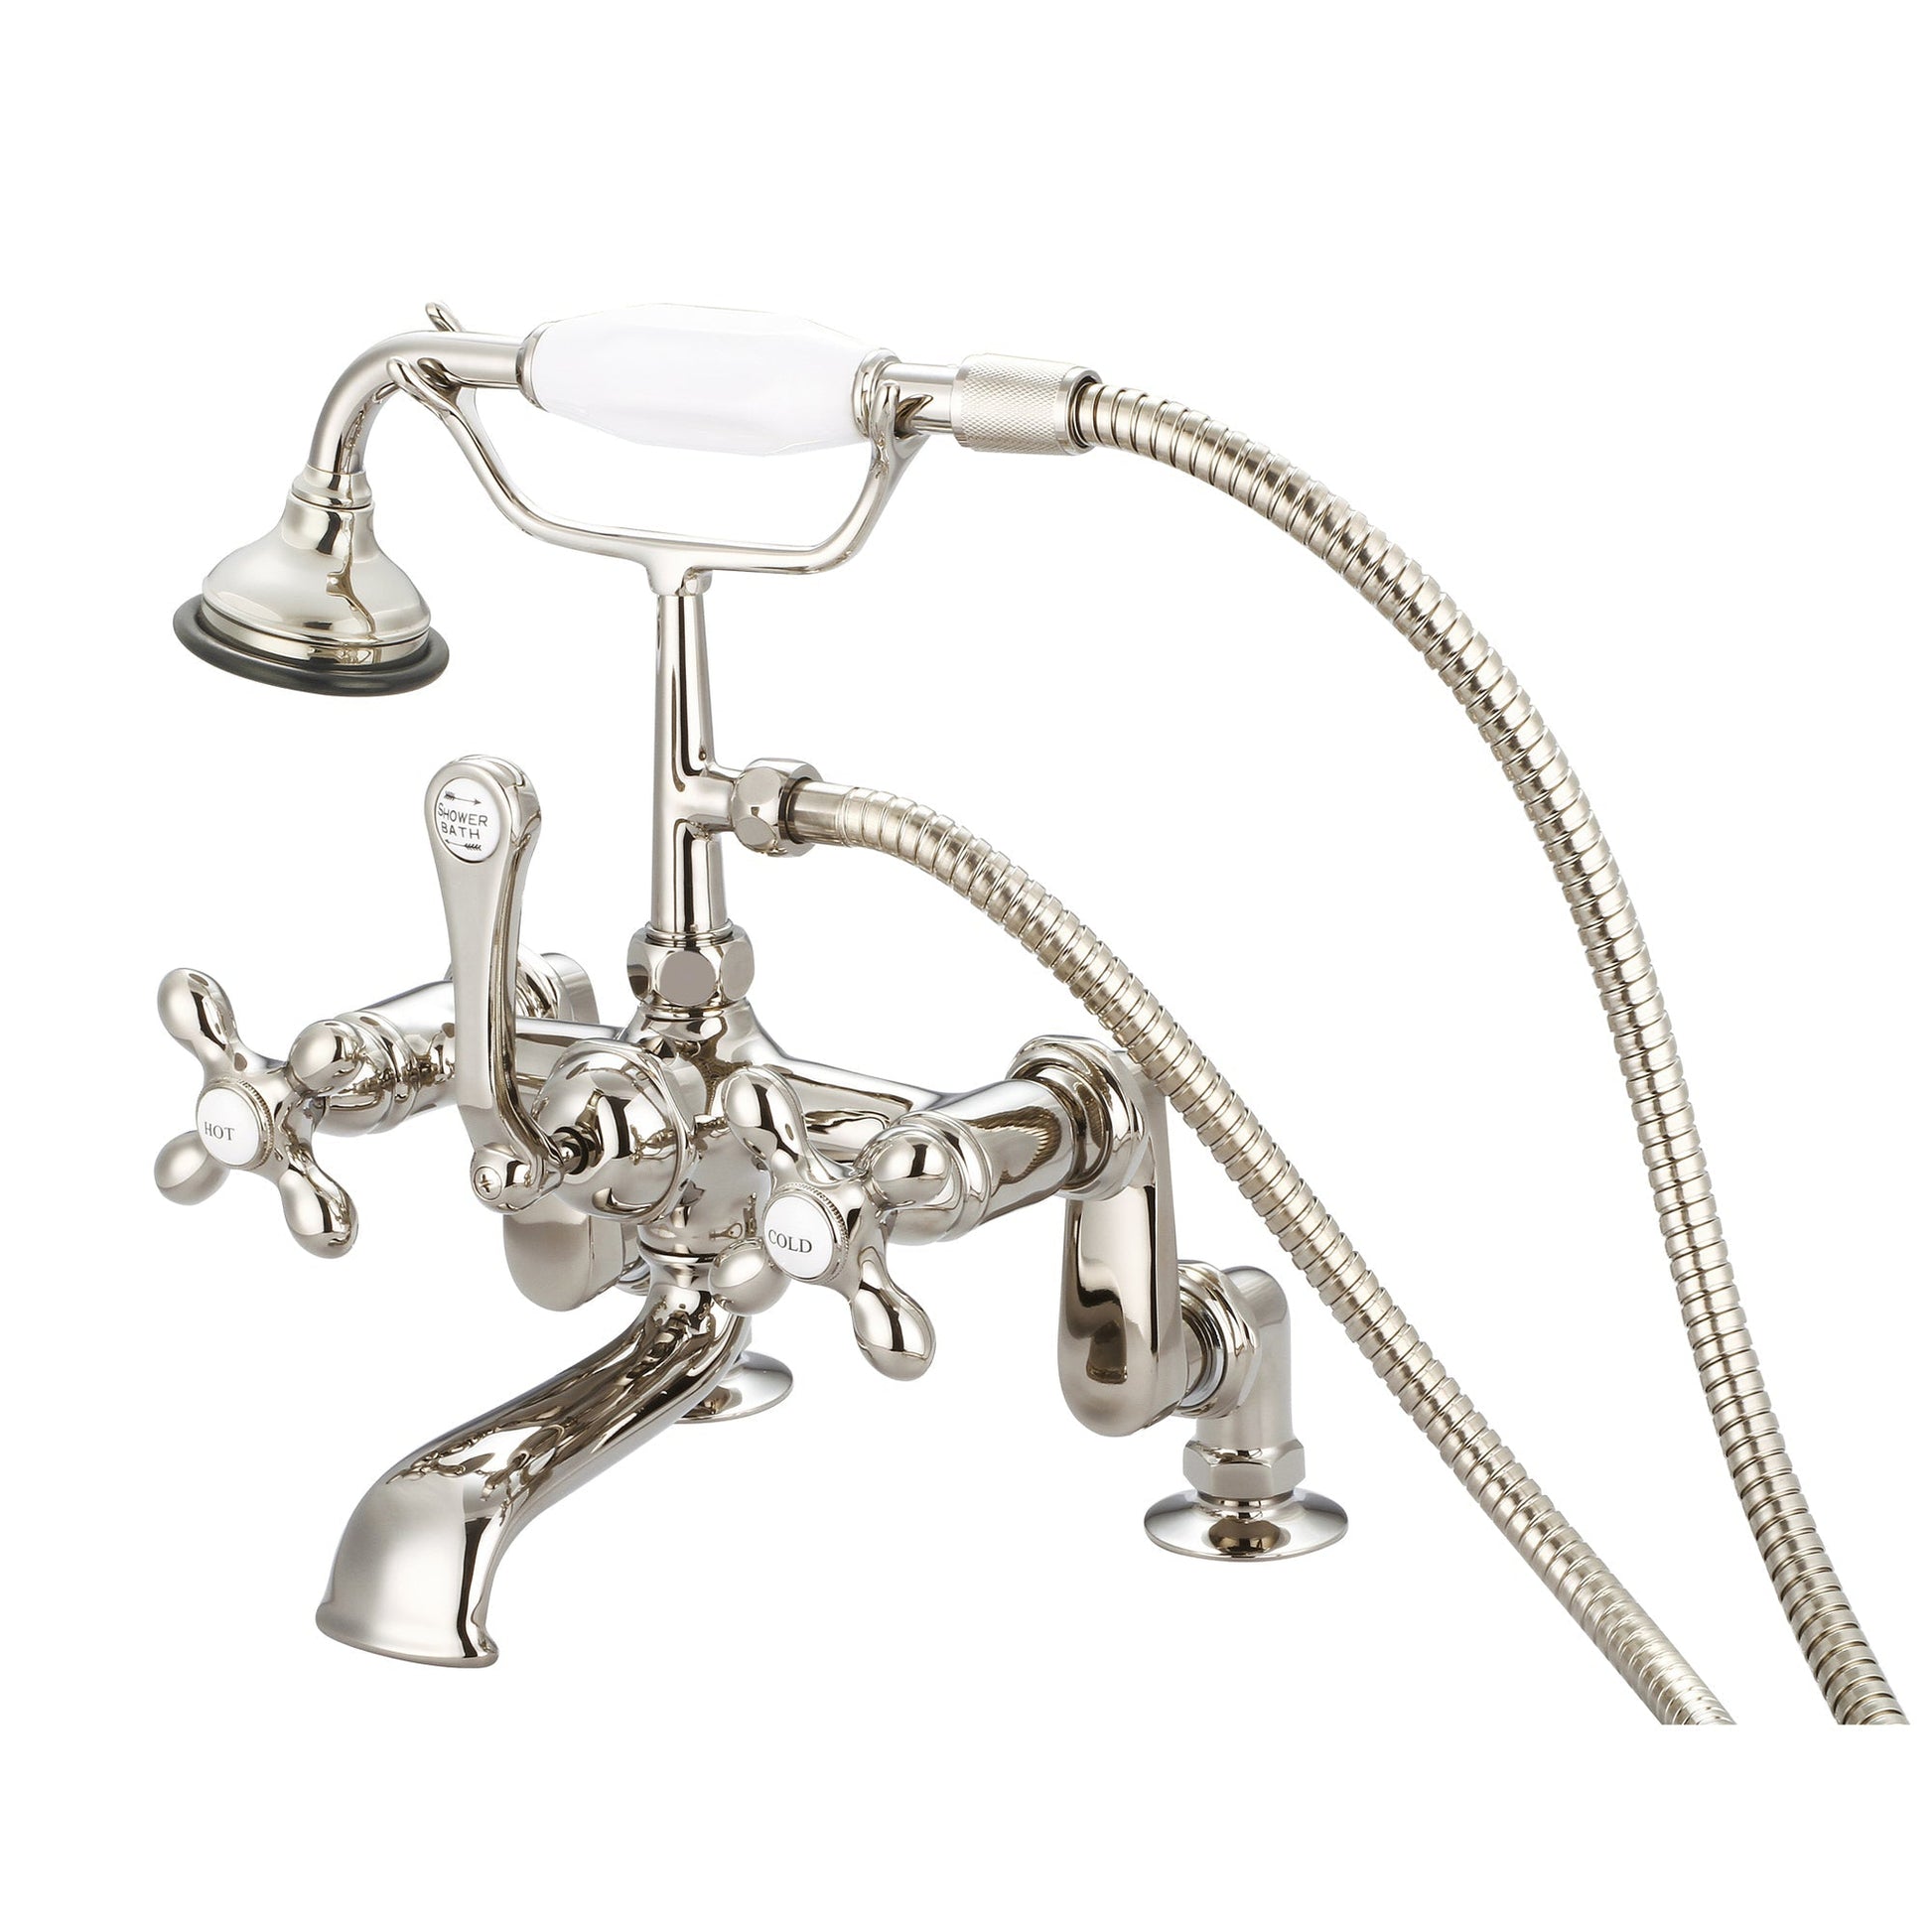 Water Creation Vintage Classic Adjustable Center Deck Mount Tub F6-0008 7" Ivory Solid Brass Faucet With Handheld Shower And Metal Lever Handles, Hot And Cold Labels Included